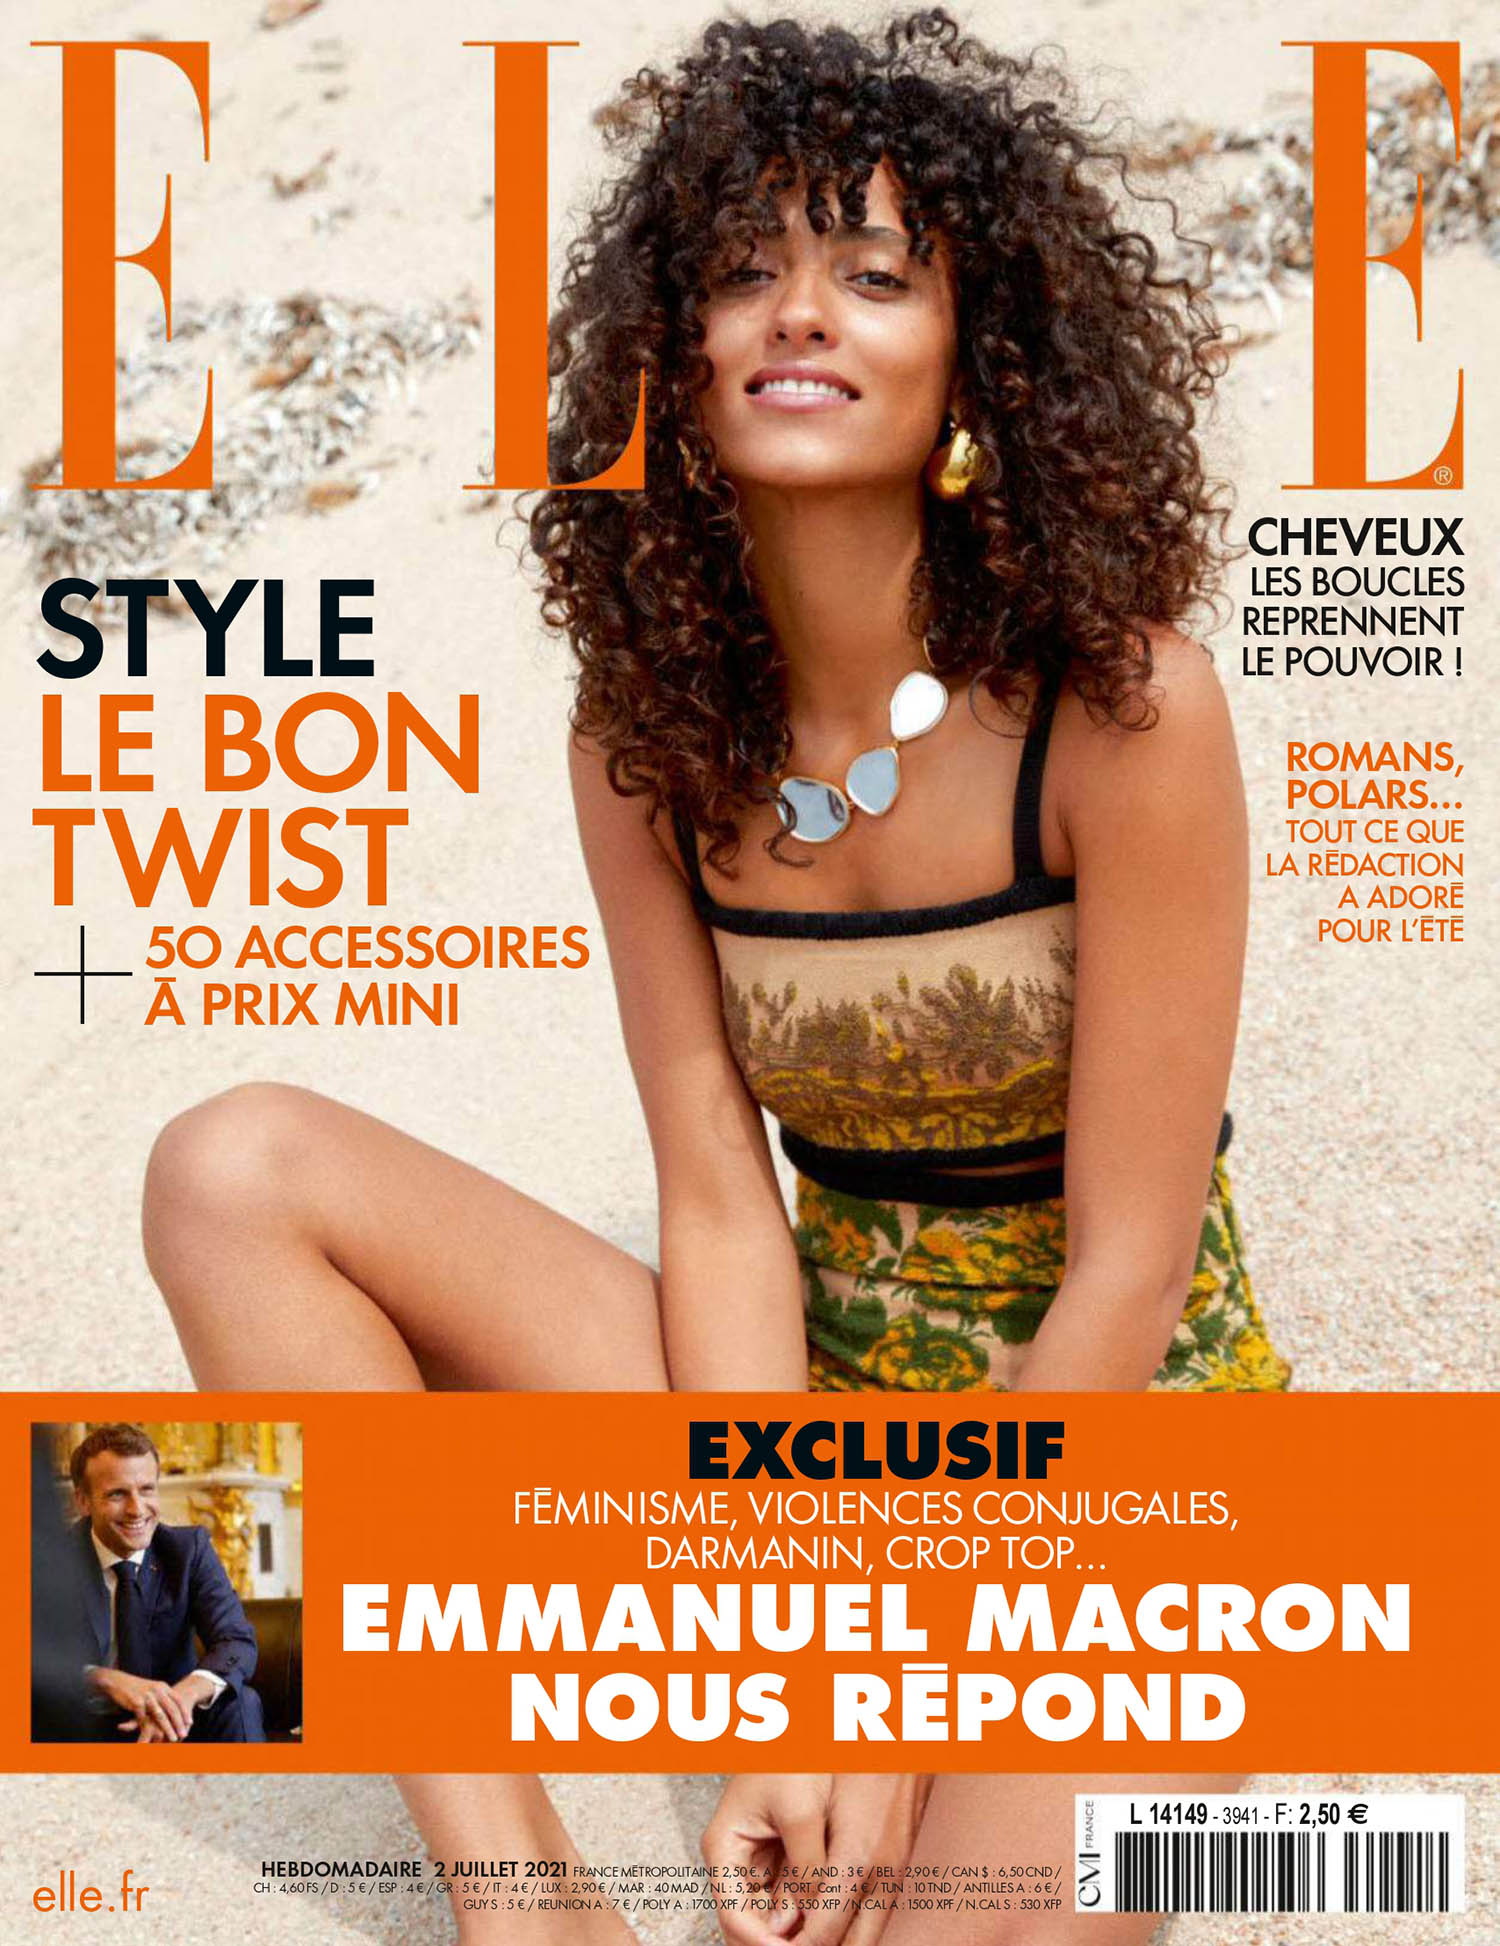 Mélodie Vaxelaire covers Elle France July 2nd, 2021 by Sam Hendel